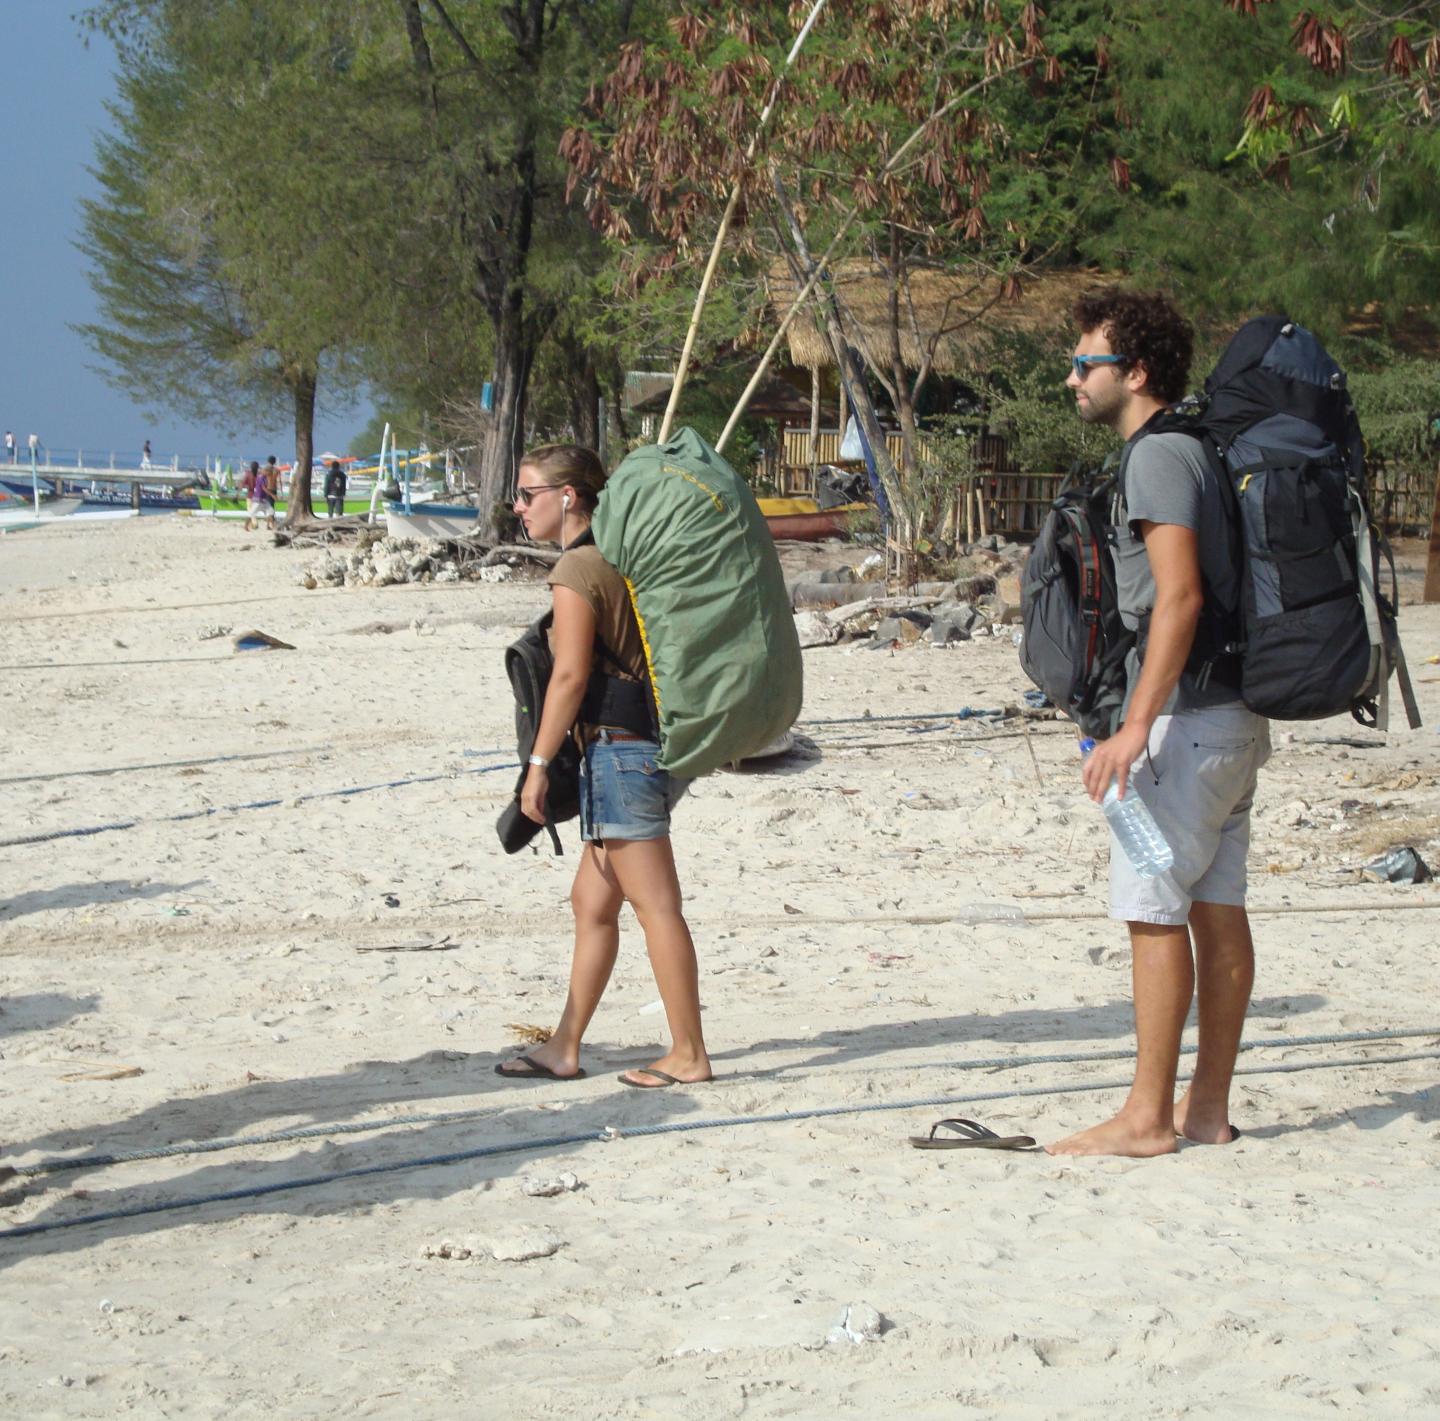 Backpackers in Indonesia